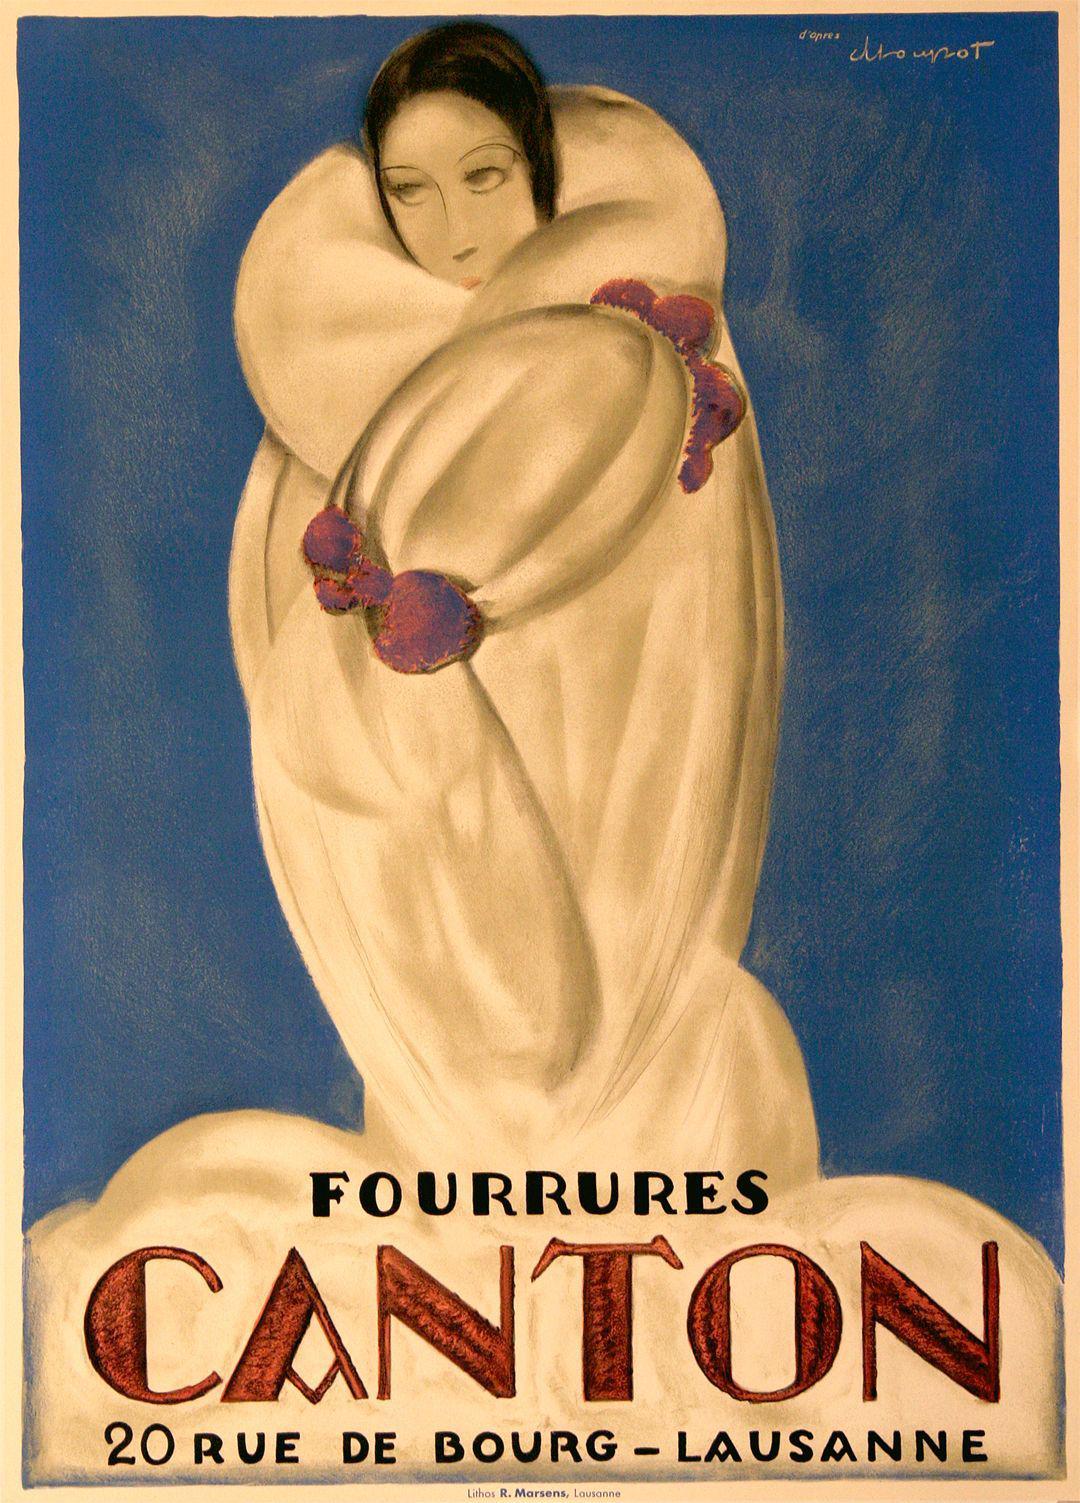 Canton Fourrures Poster by Charles Loupot c1930